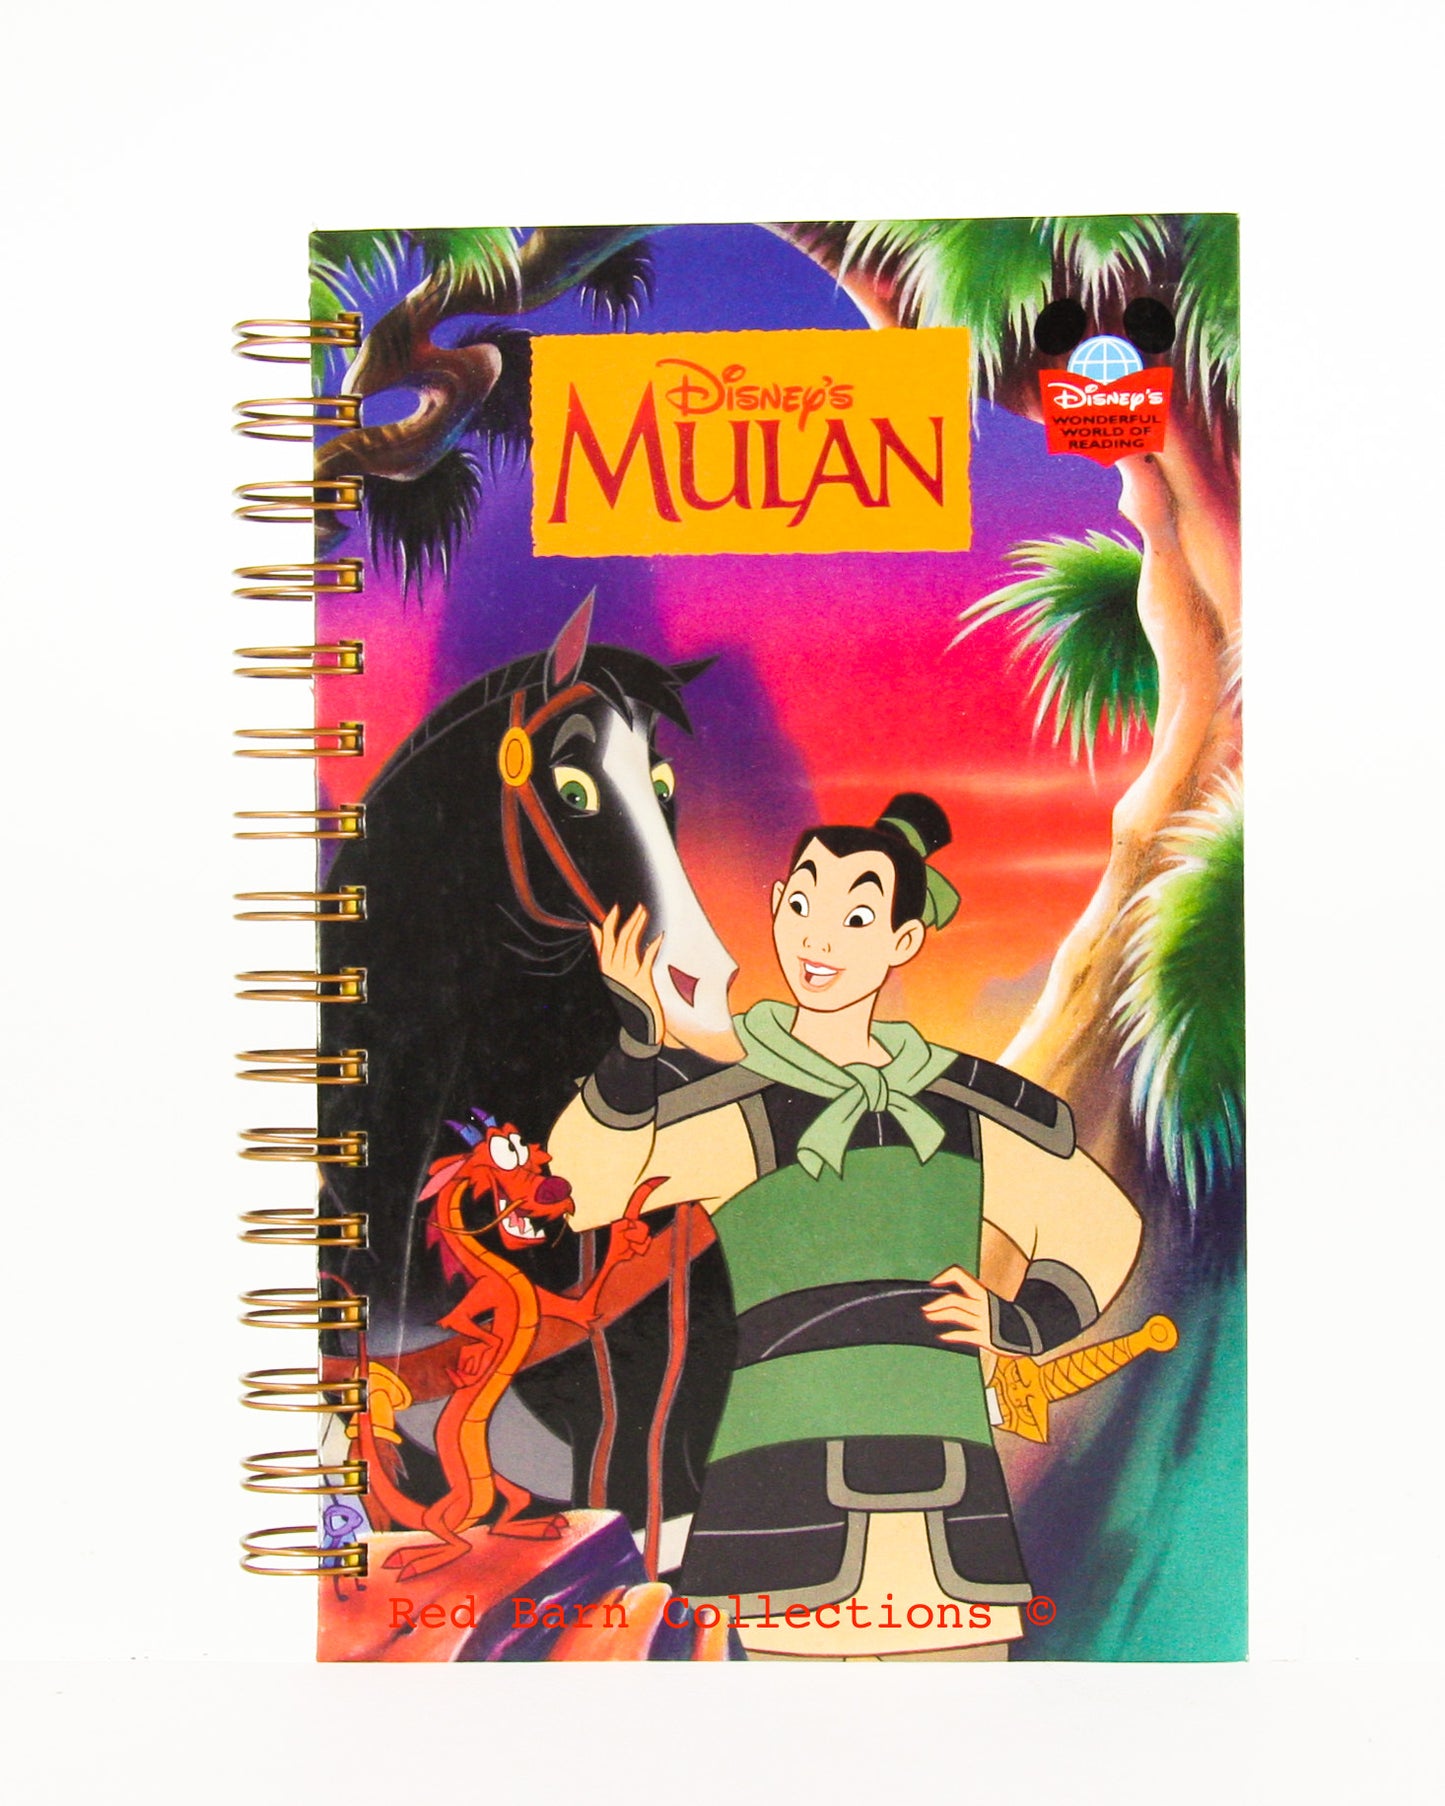 Mulan-Red Barn Collections